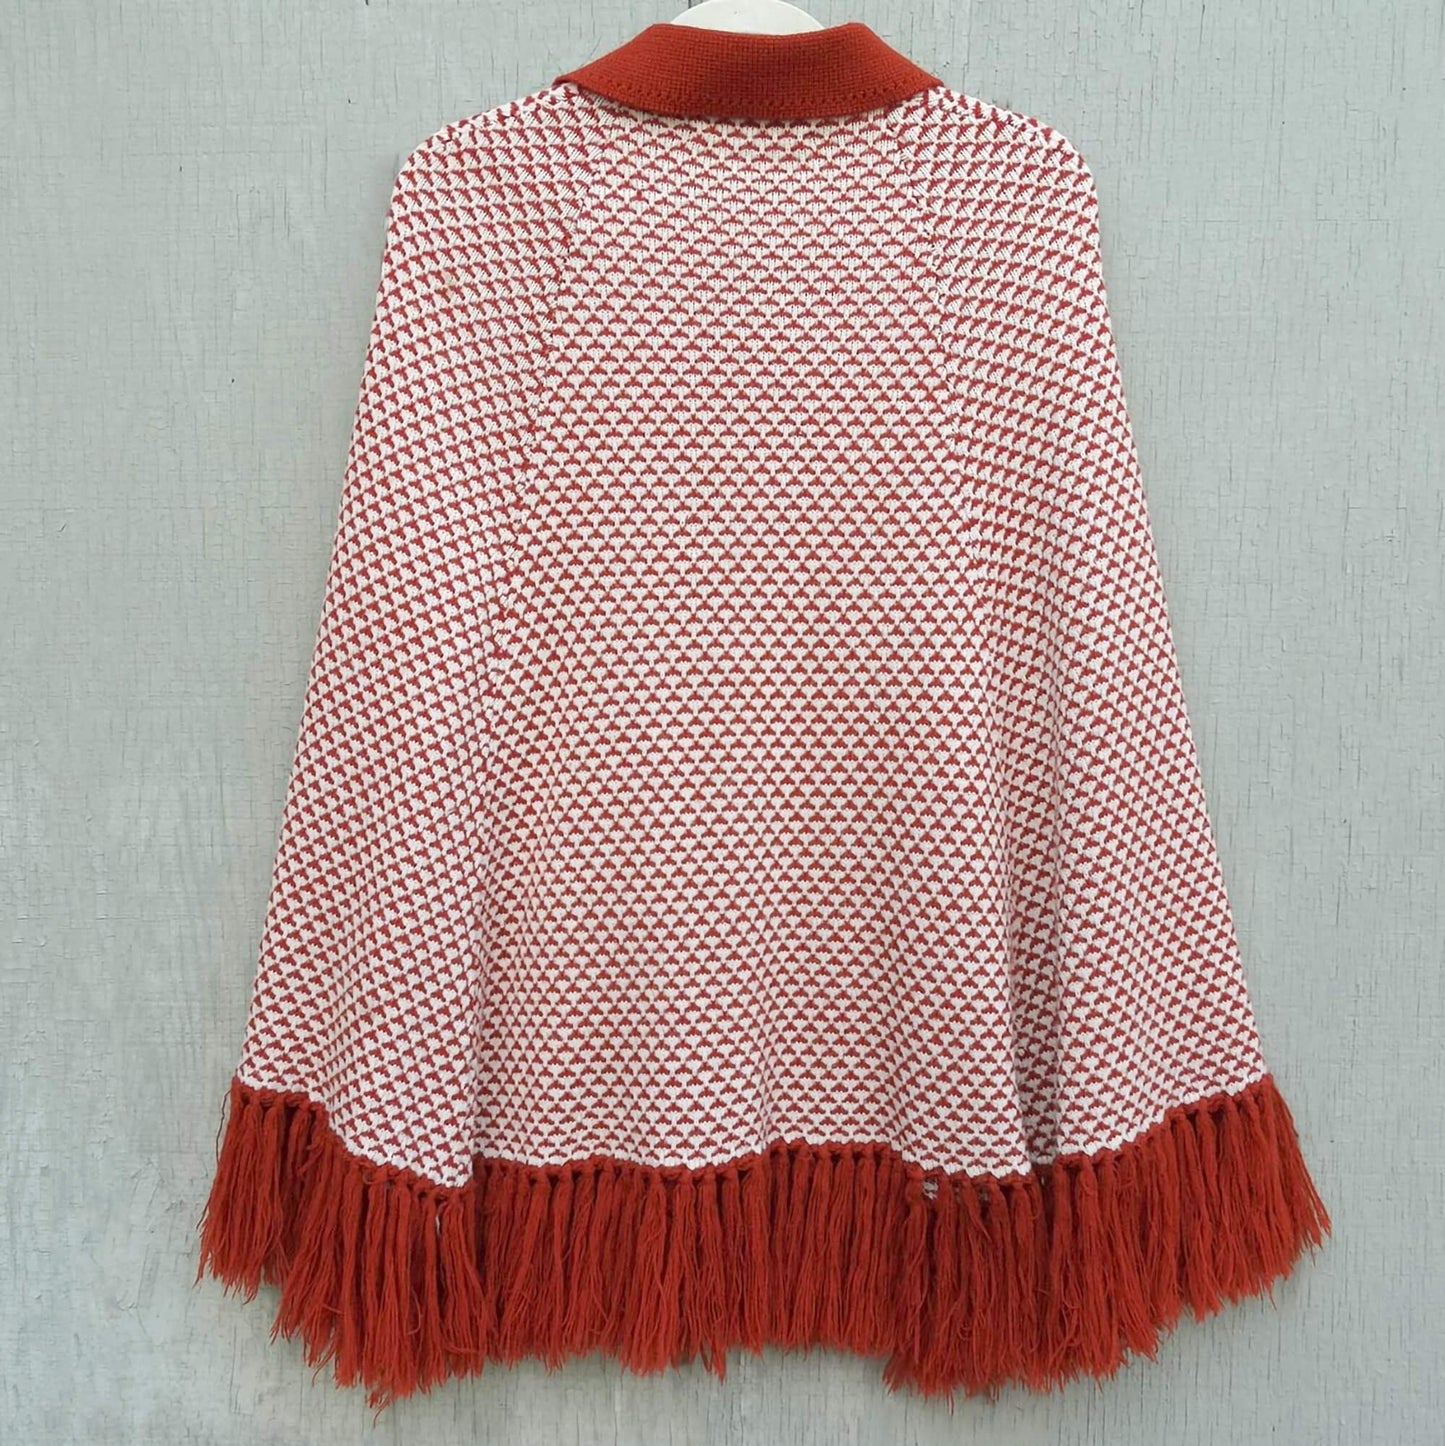 Sweater-Bee-Cape by-Banff.-Orange-and-White-Patterned.-Mother-of-Pearl-Buttons.-Fringed.-Shop-eBargainsAndDeals.com.